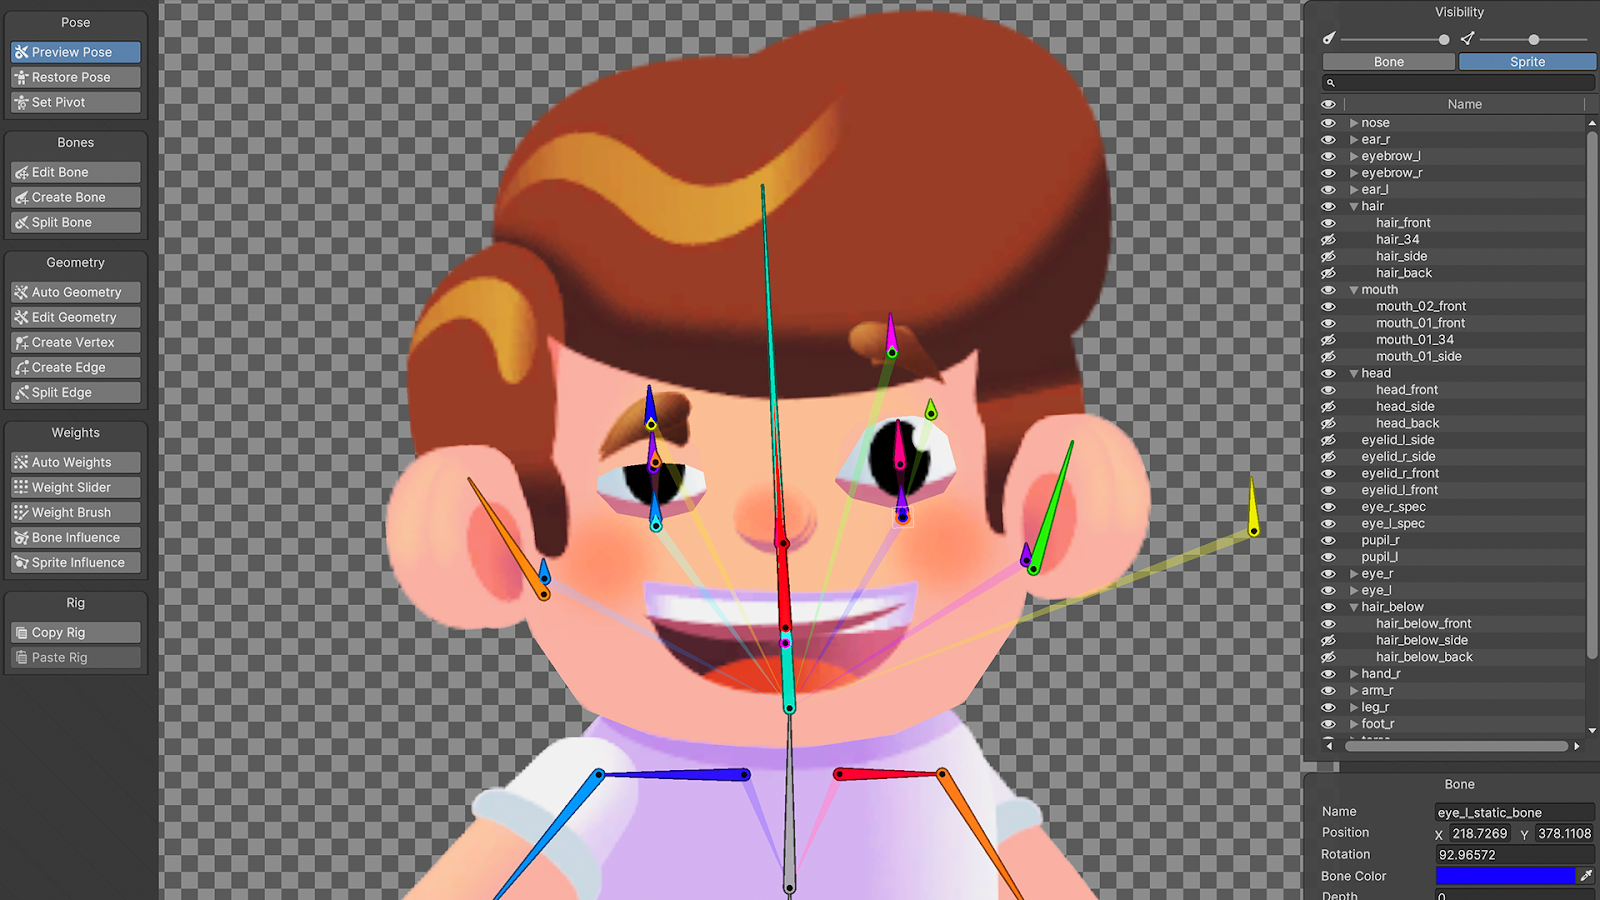 The facial rigging enables full control of expressions, including the creation of a semi-tridimensional effect in some animations.